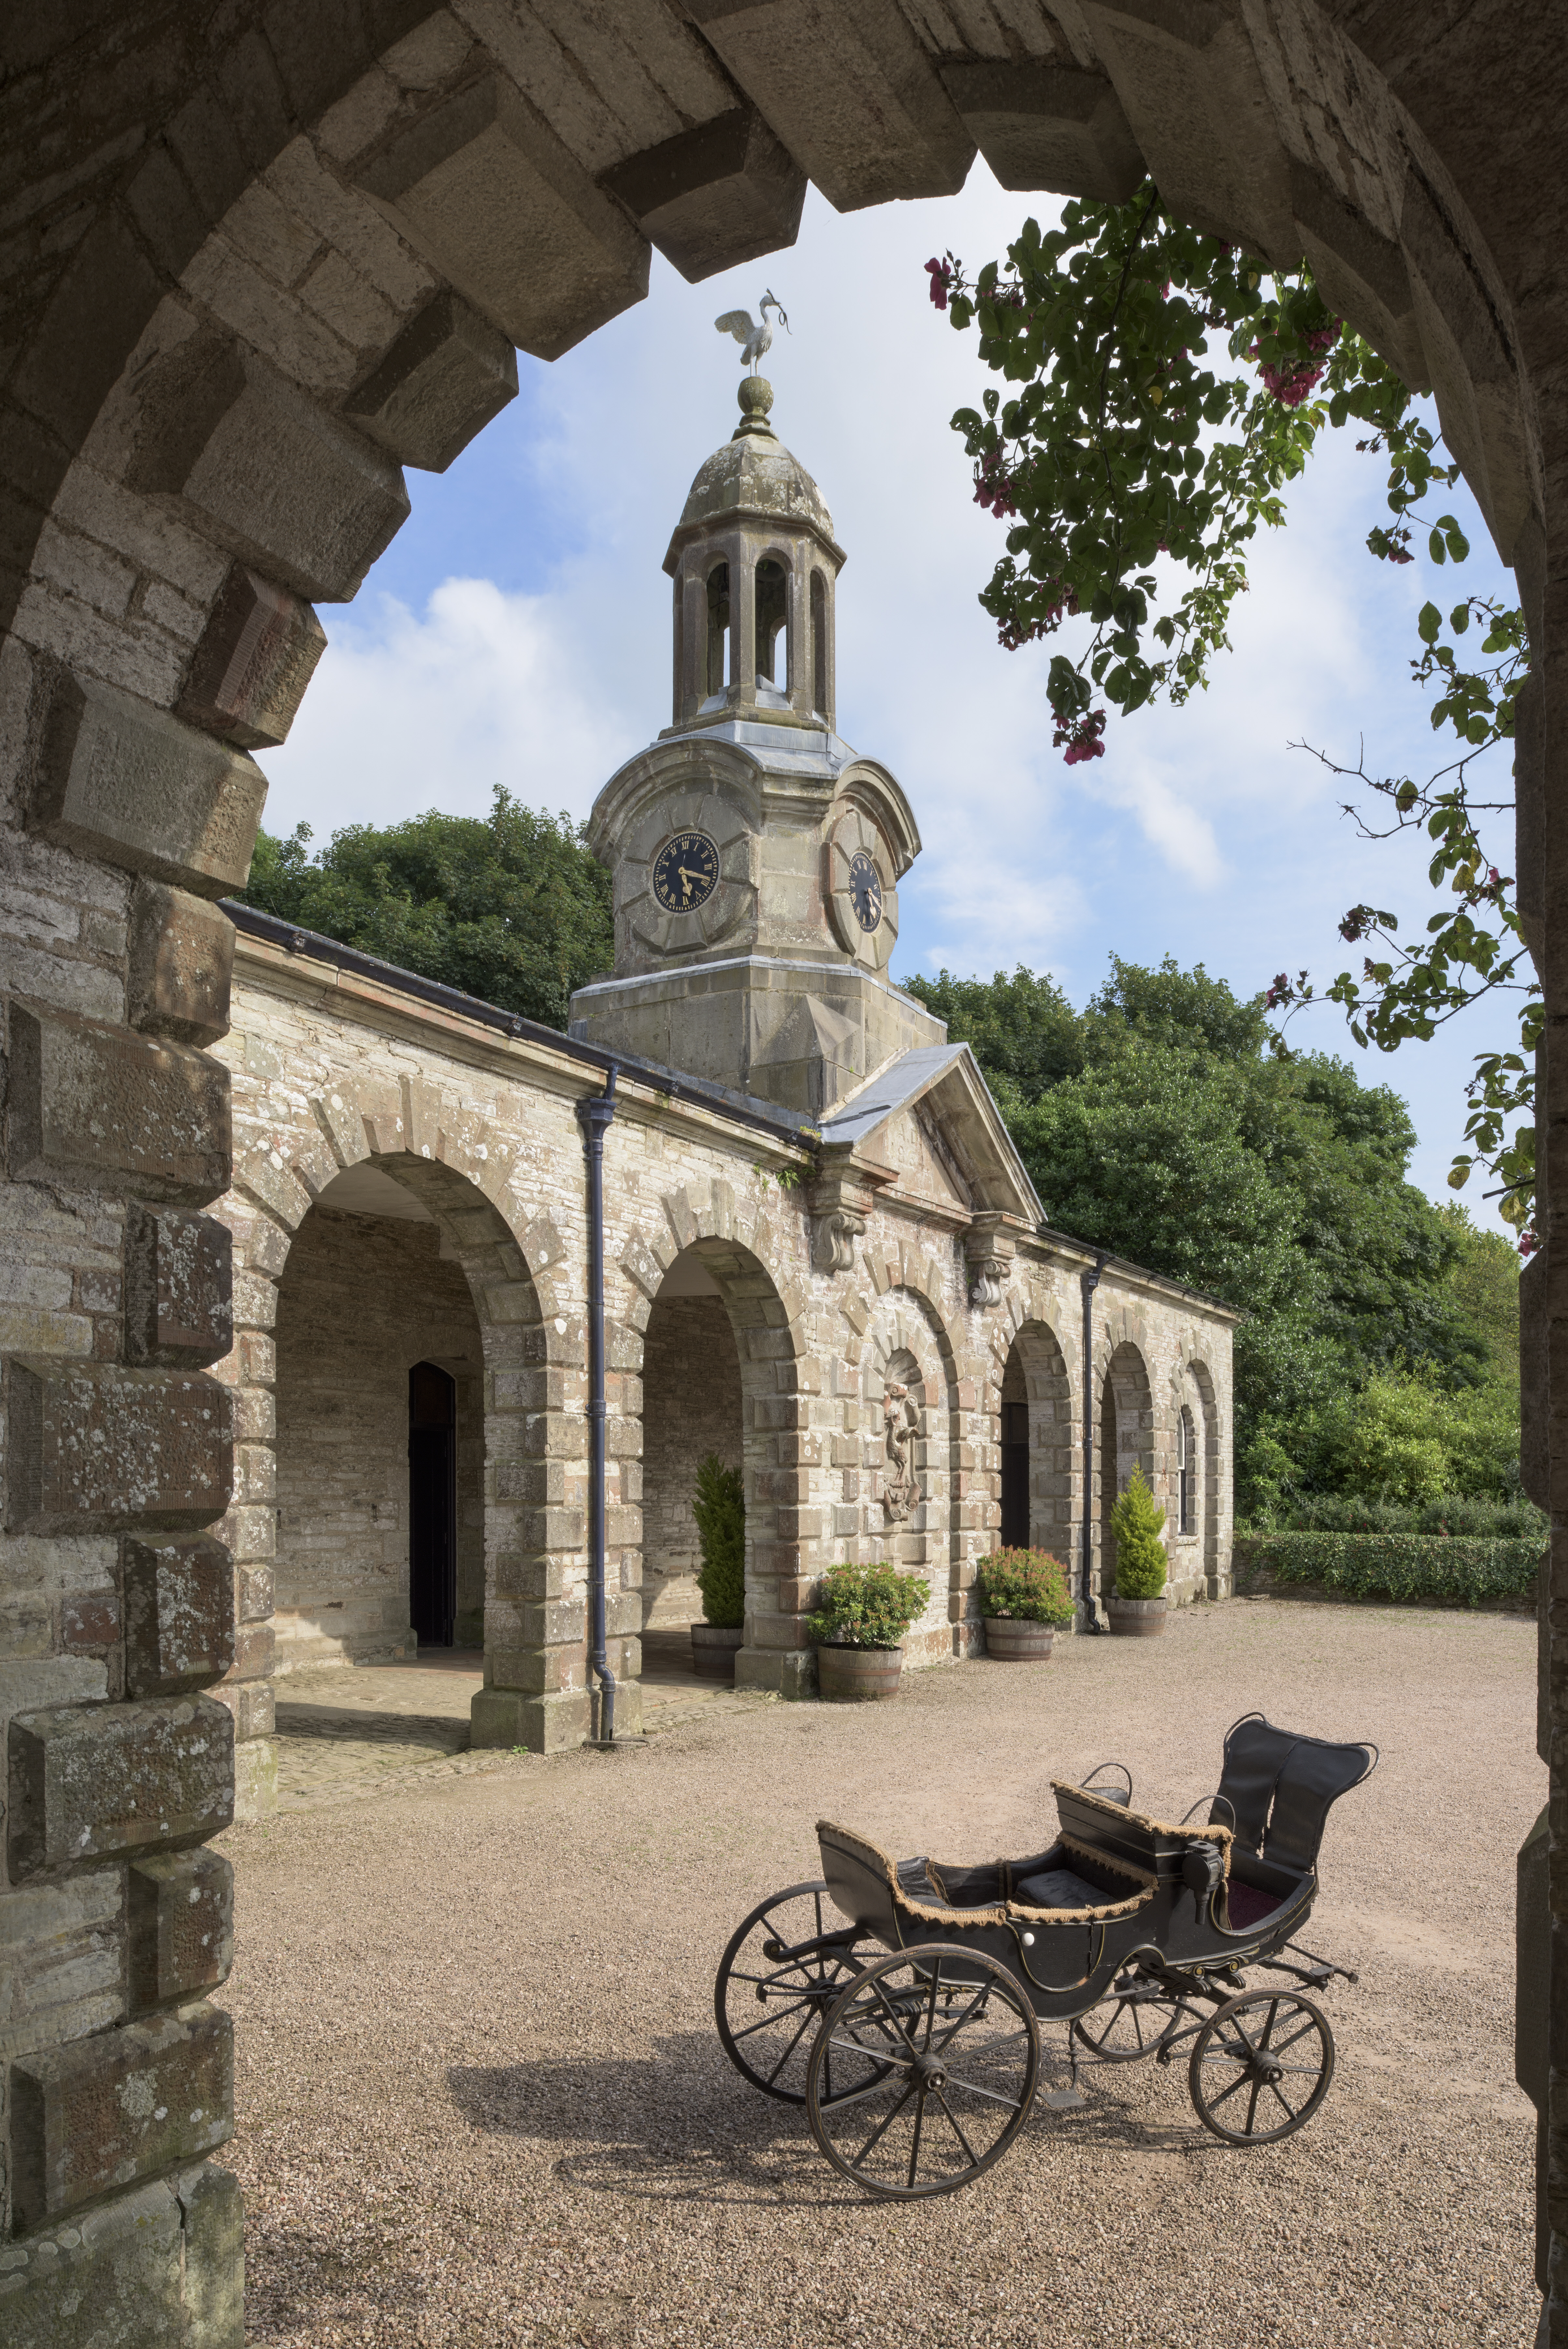 Child's carriage at Arlington Court and the National Trust Carriage Museum ©National Trust Images John Hammond